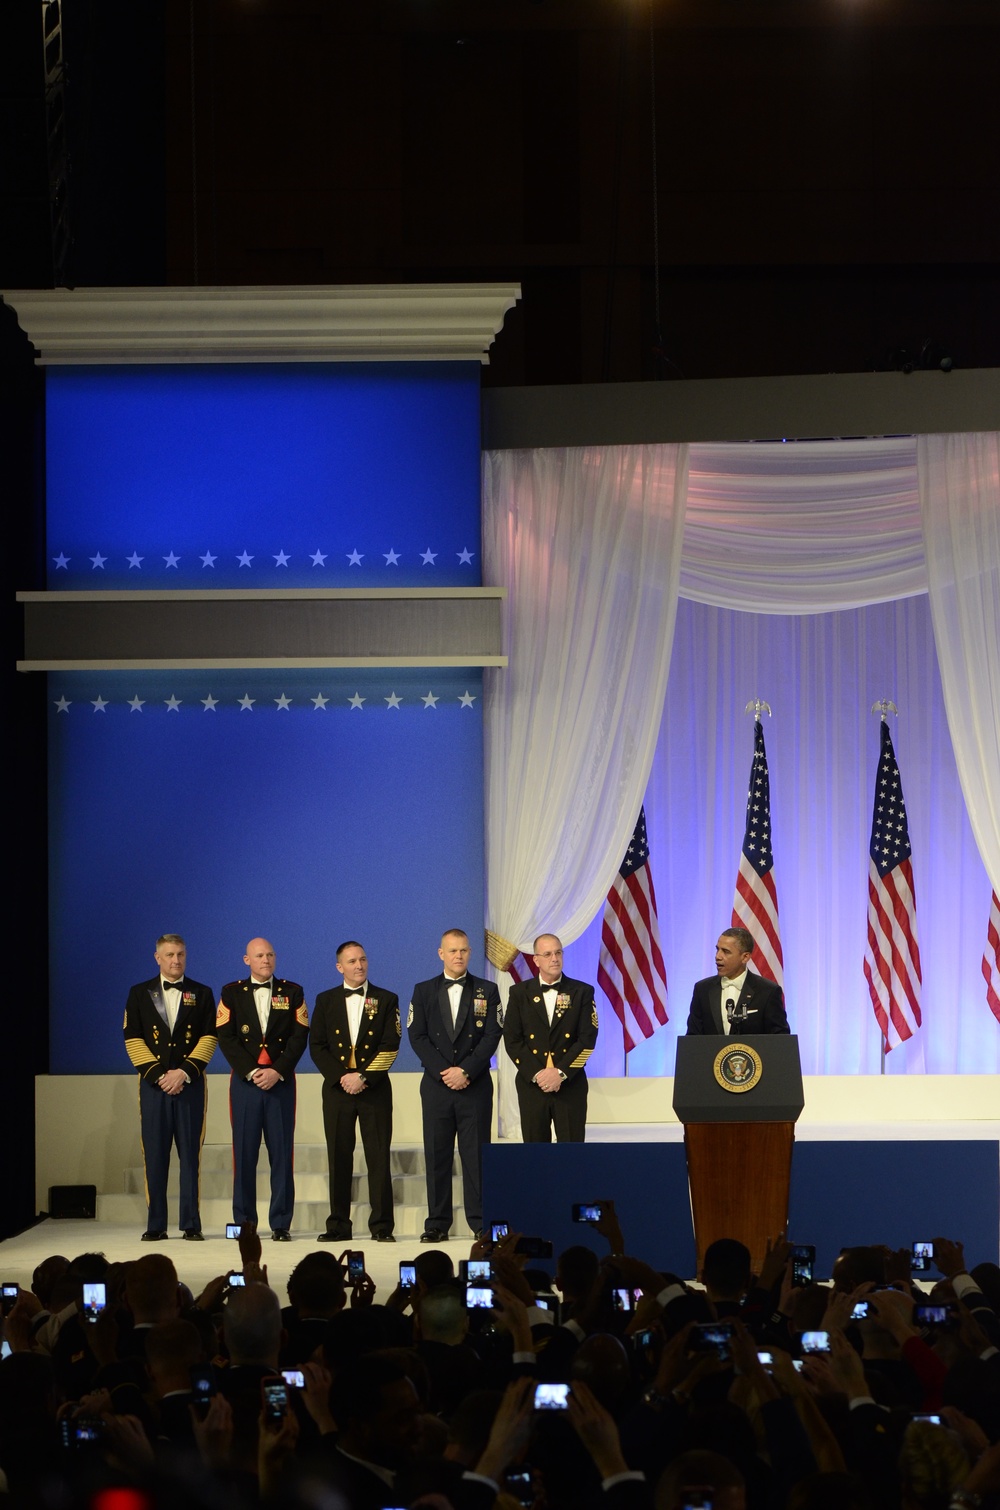 Commander in Chief Inaugural Ball